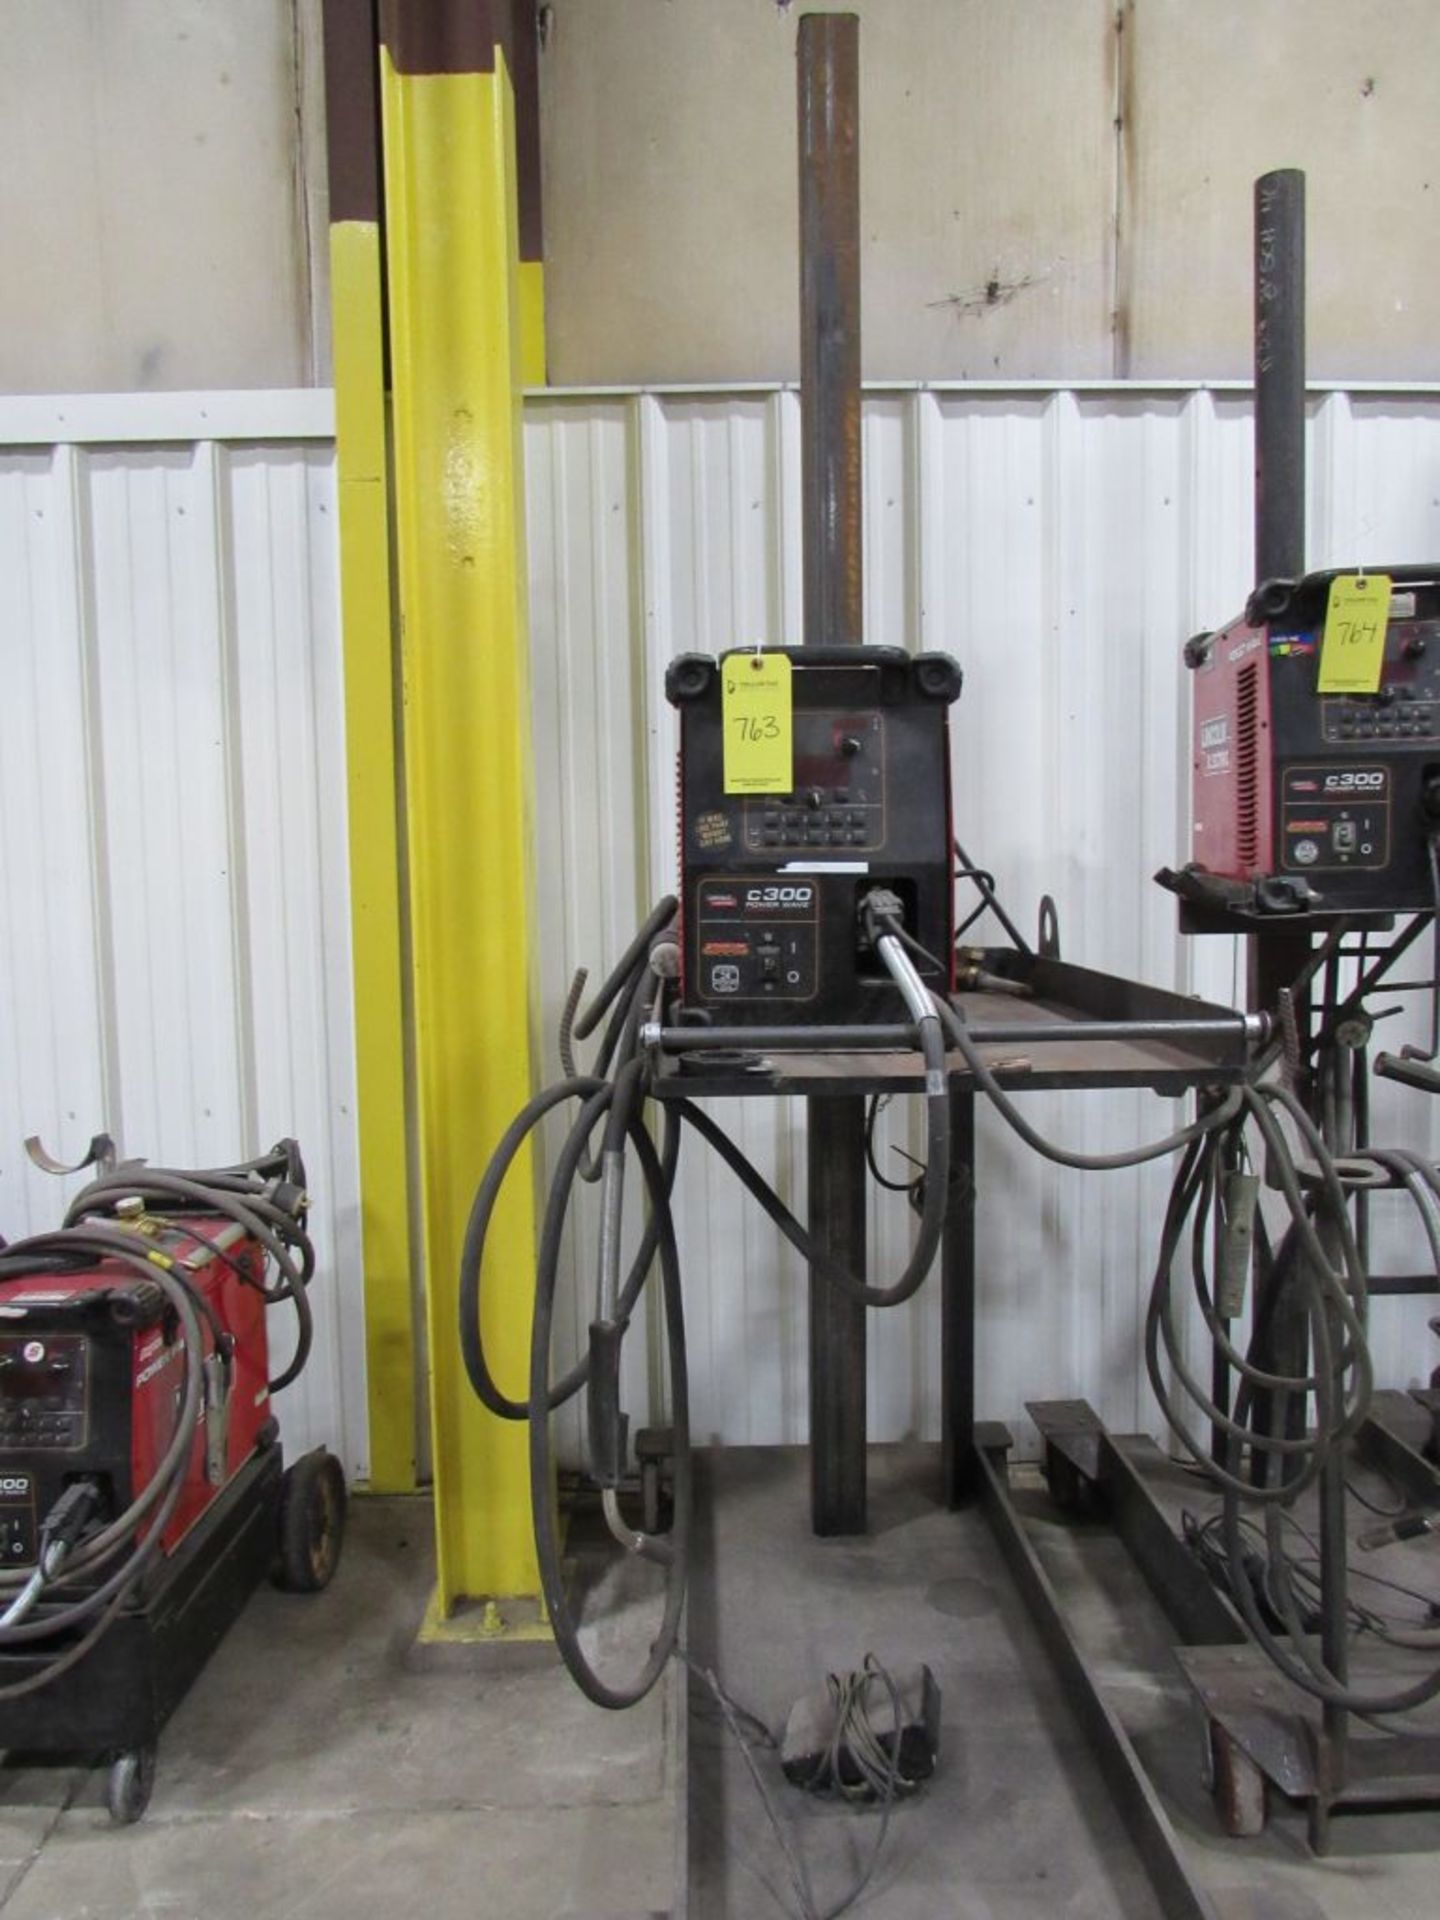 Lincoln C300 Power Wave Welder|Tag: 234763